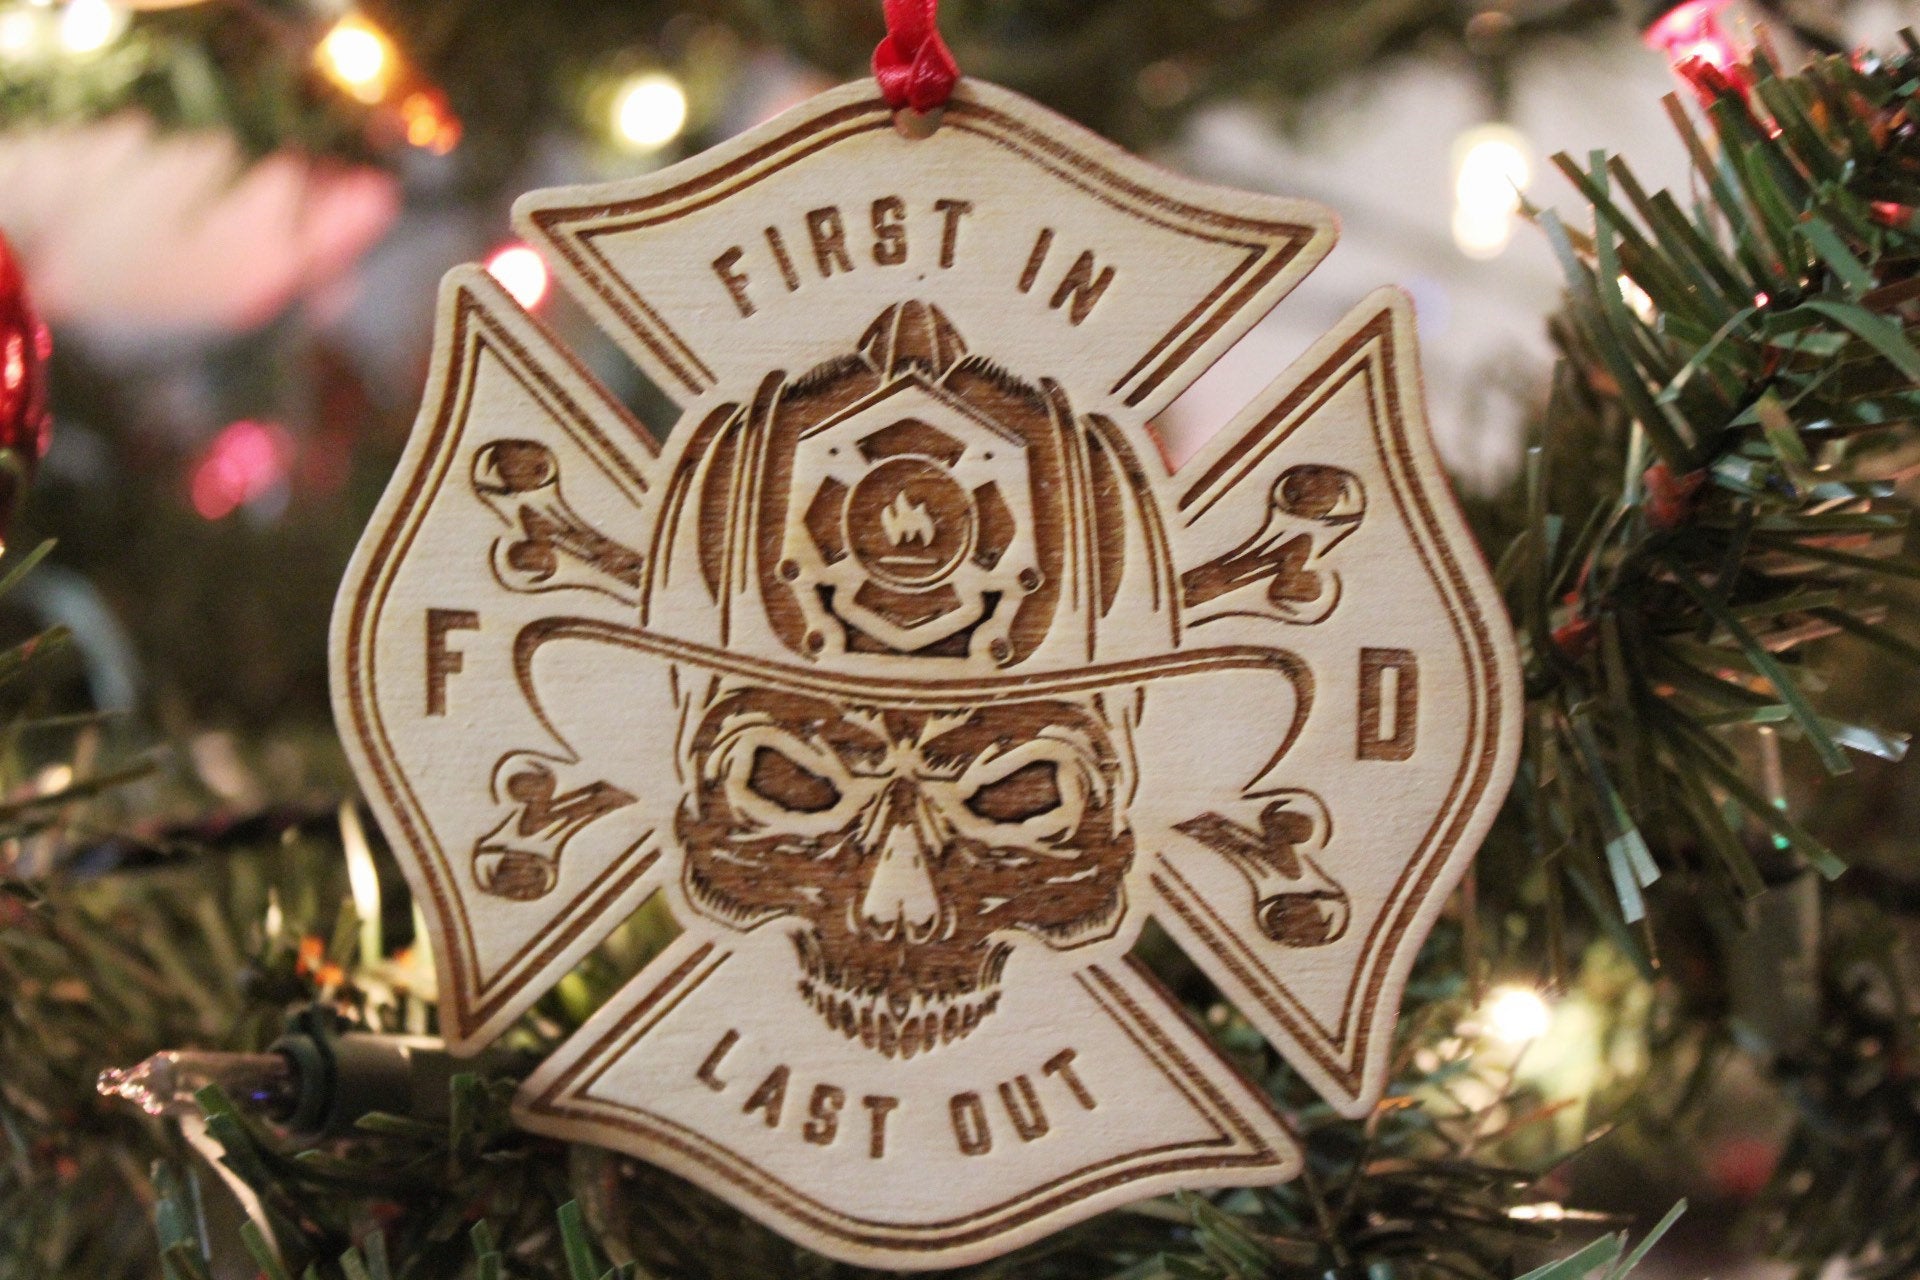 Fireman Skull Badge Christmas Ornament Gift For Him, Fire fighter First Responder First In Last Out Wooden Christmas Ornament